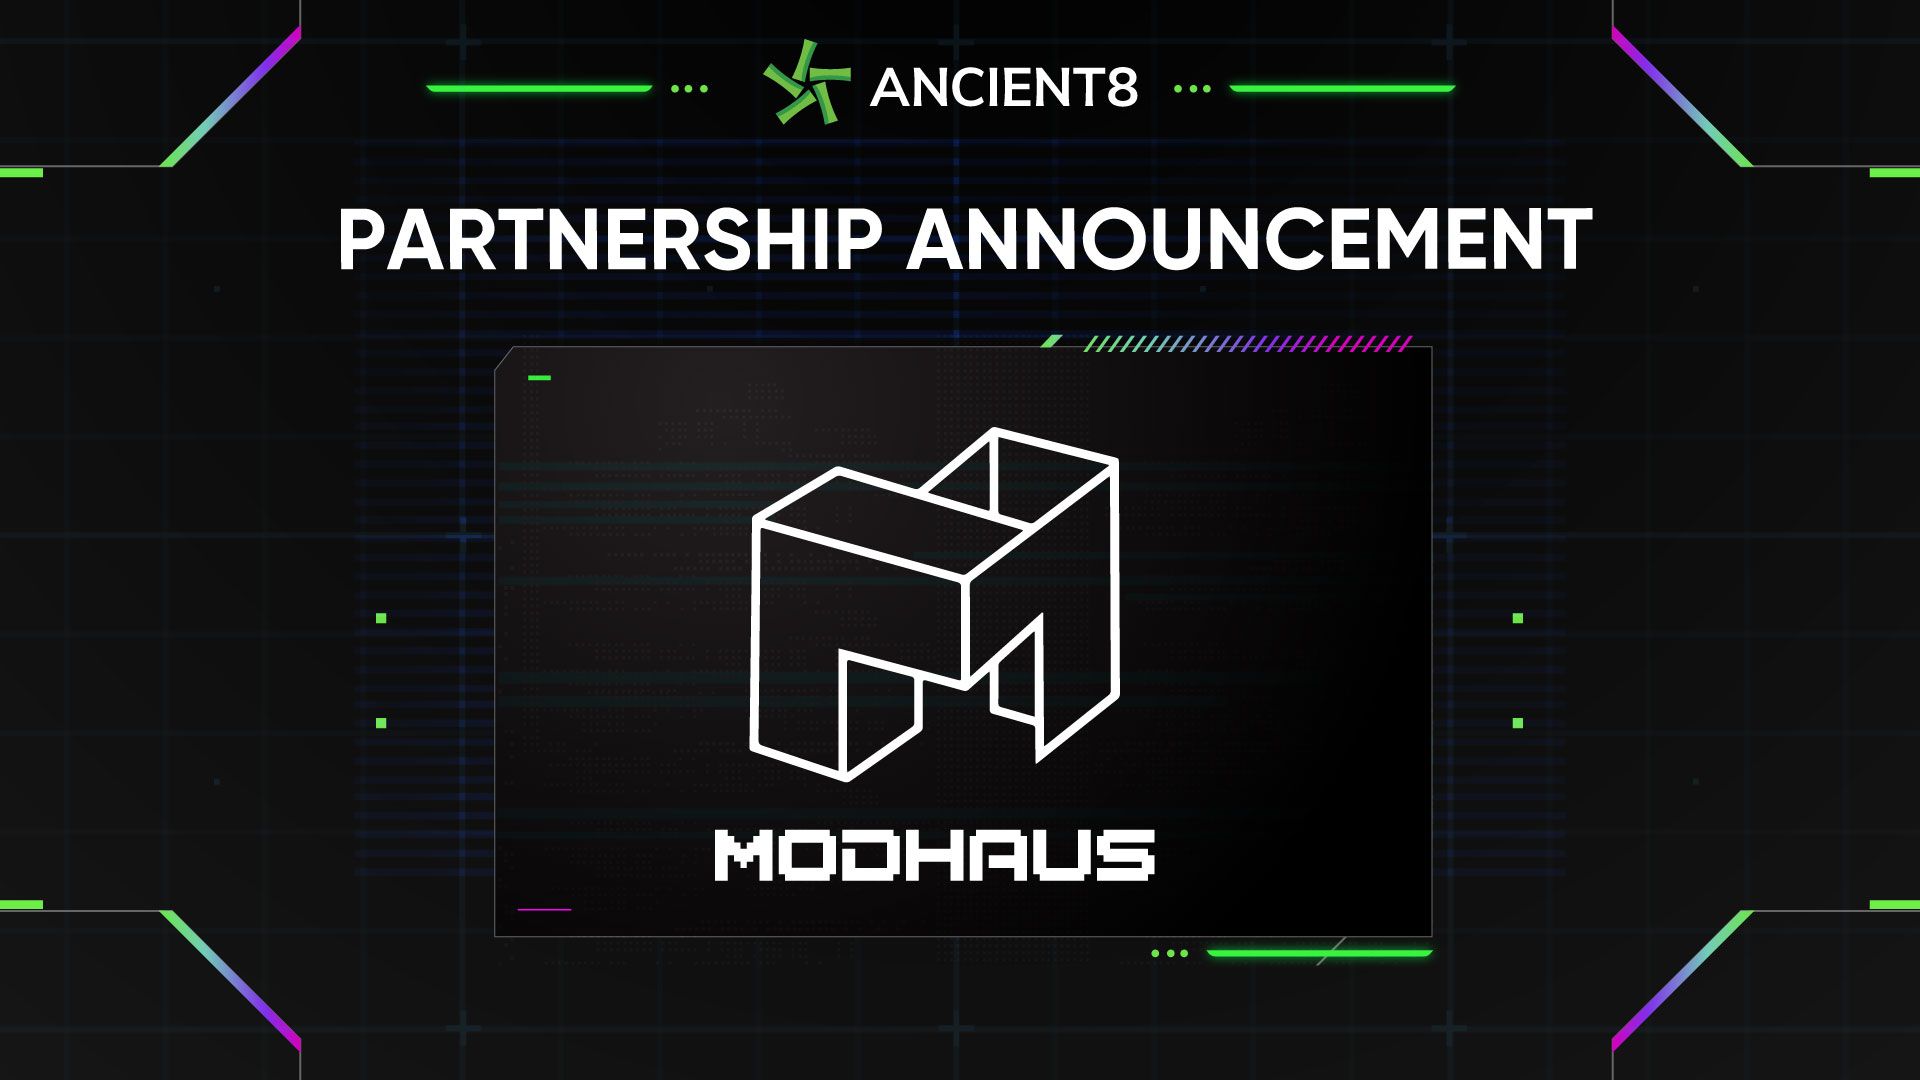 Ancient8 Partners with Modhaus, bringing the Entertainment Industry into Web 3.0